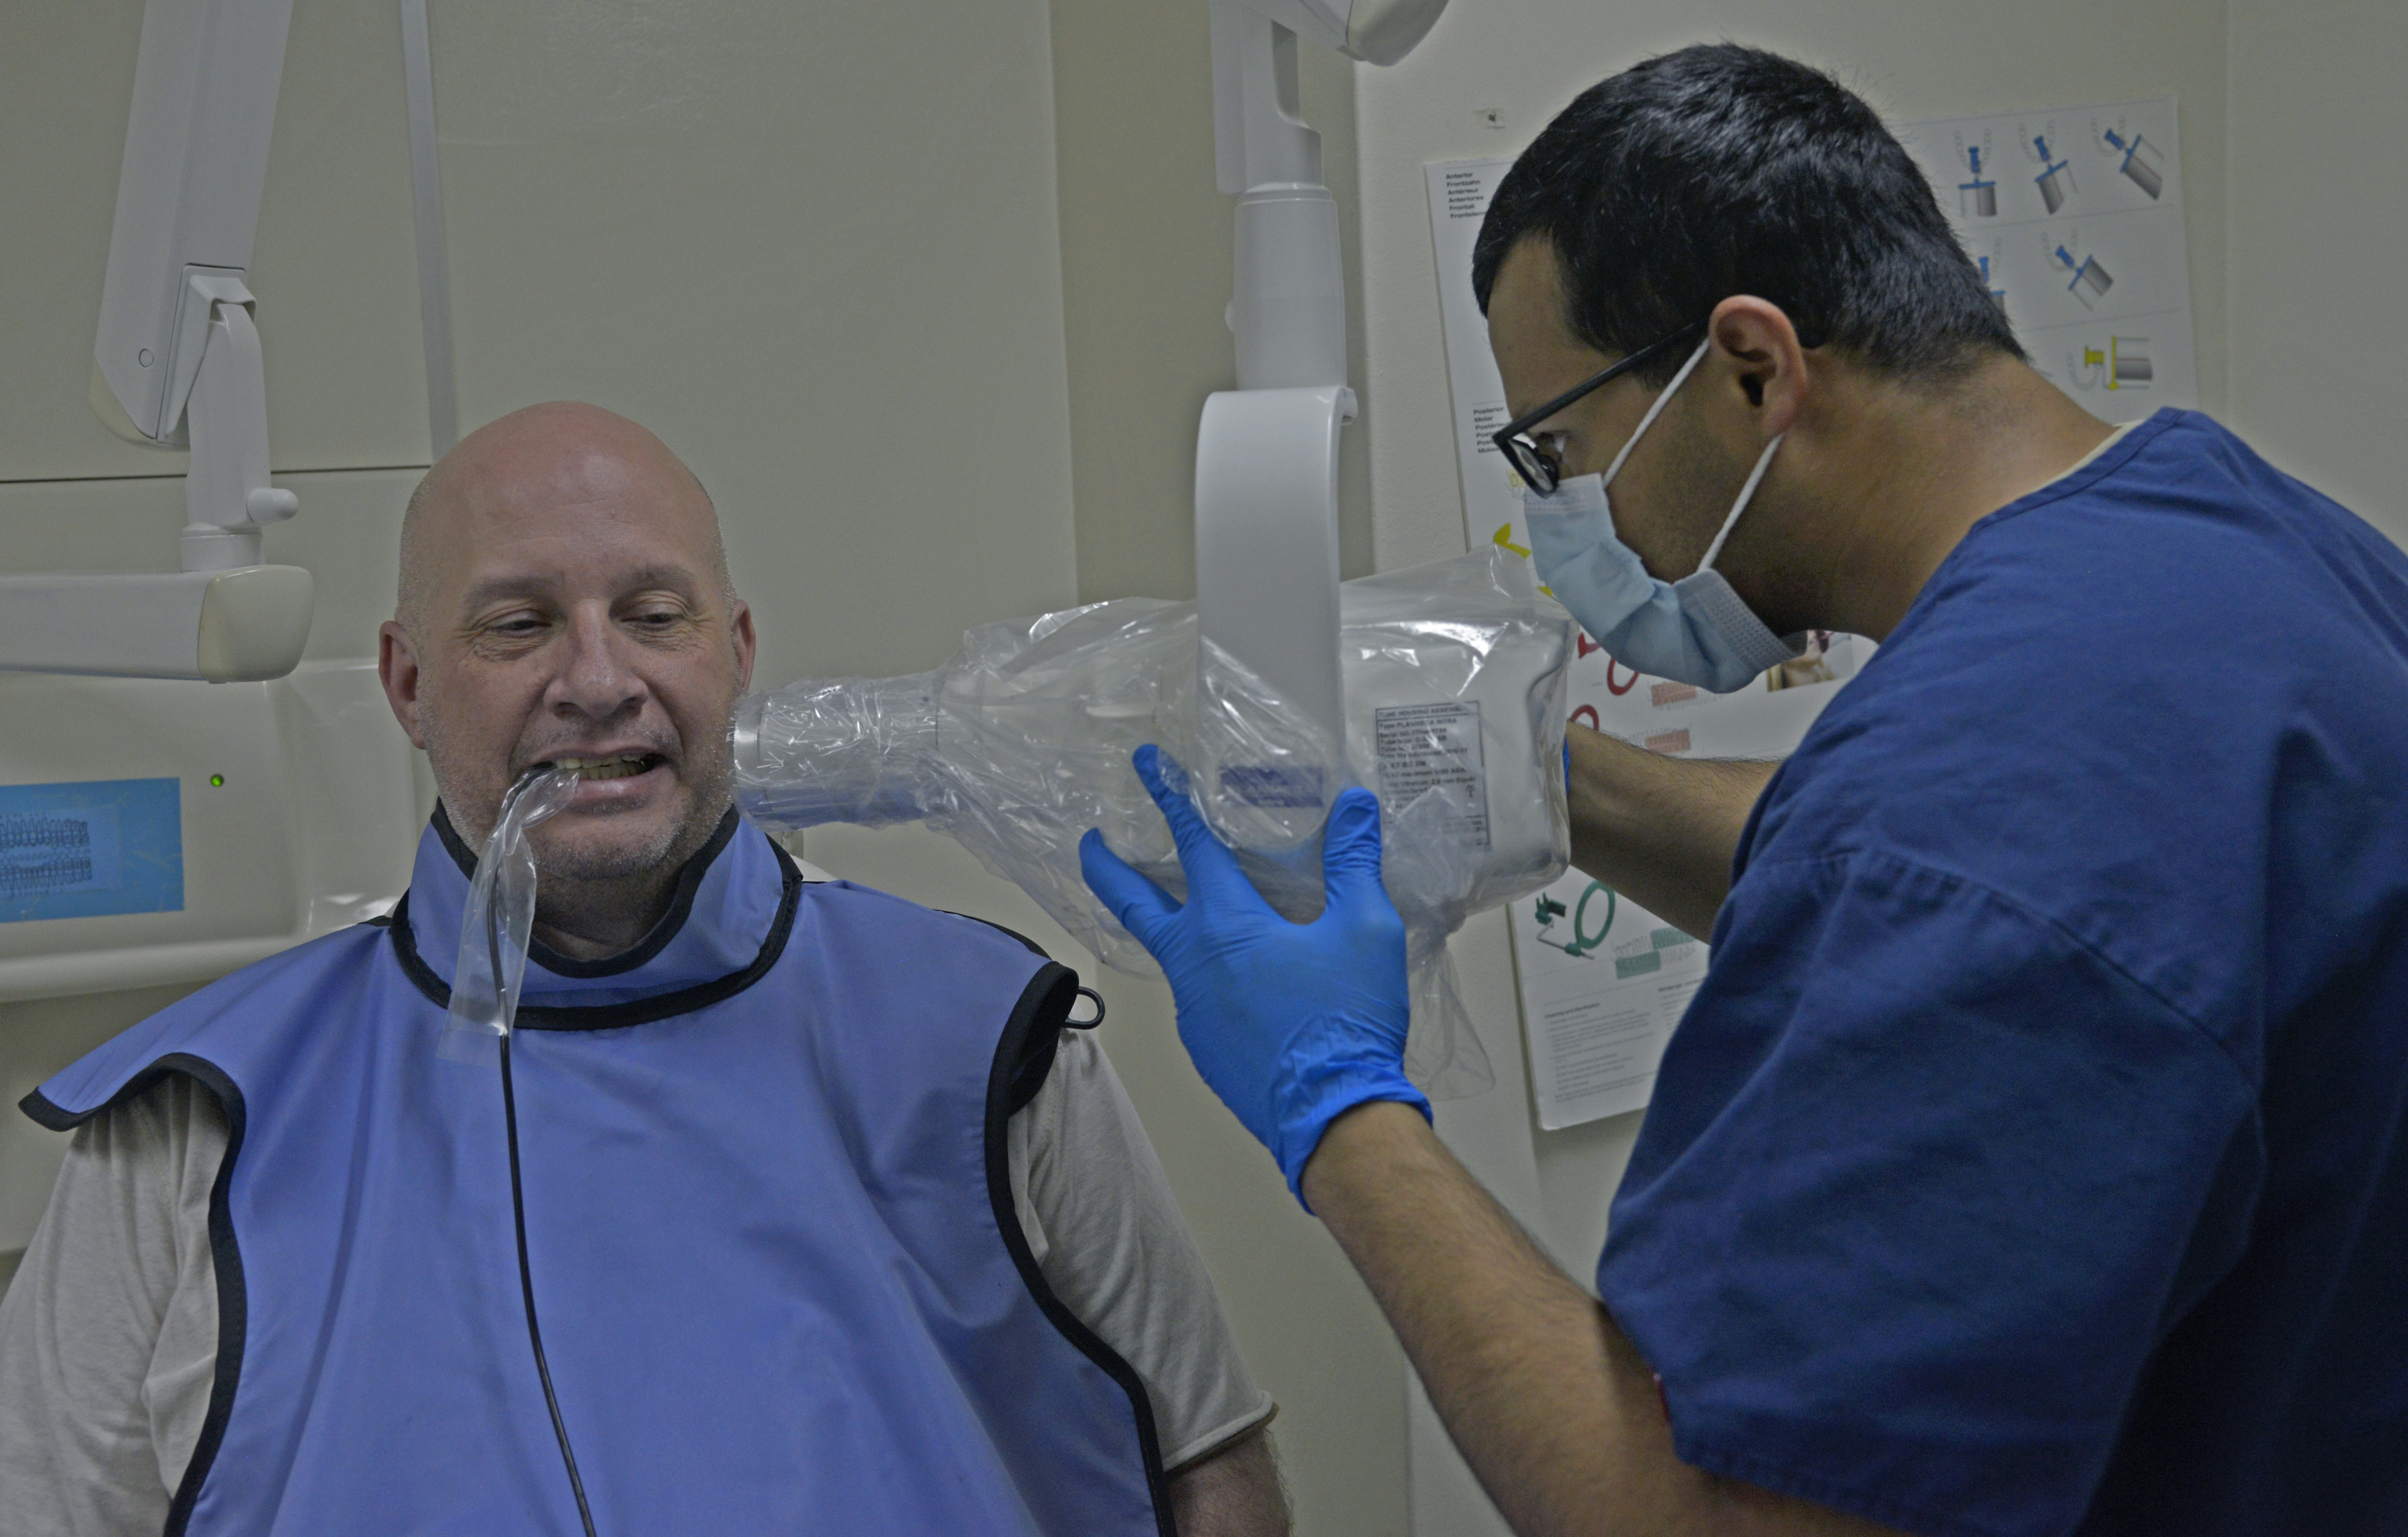 Yokota s Dental: cleaning one mouth at a time